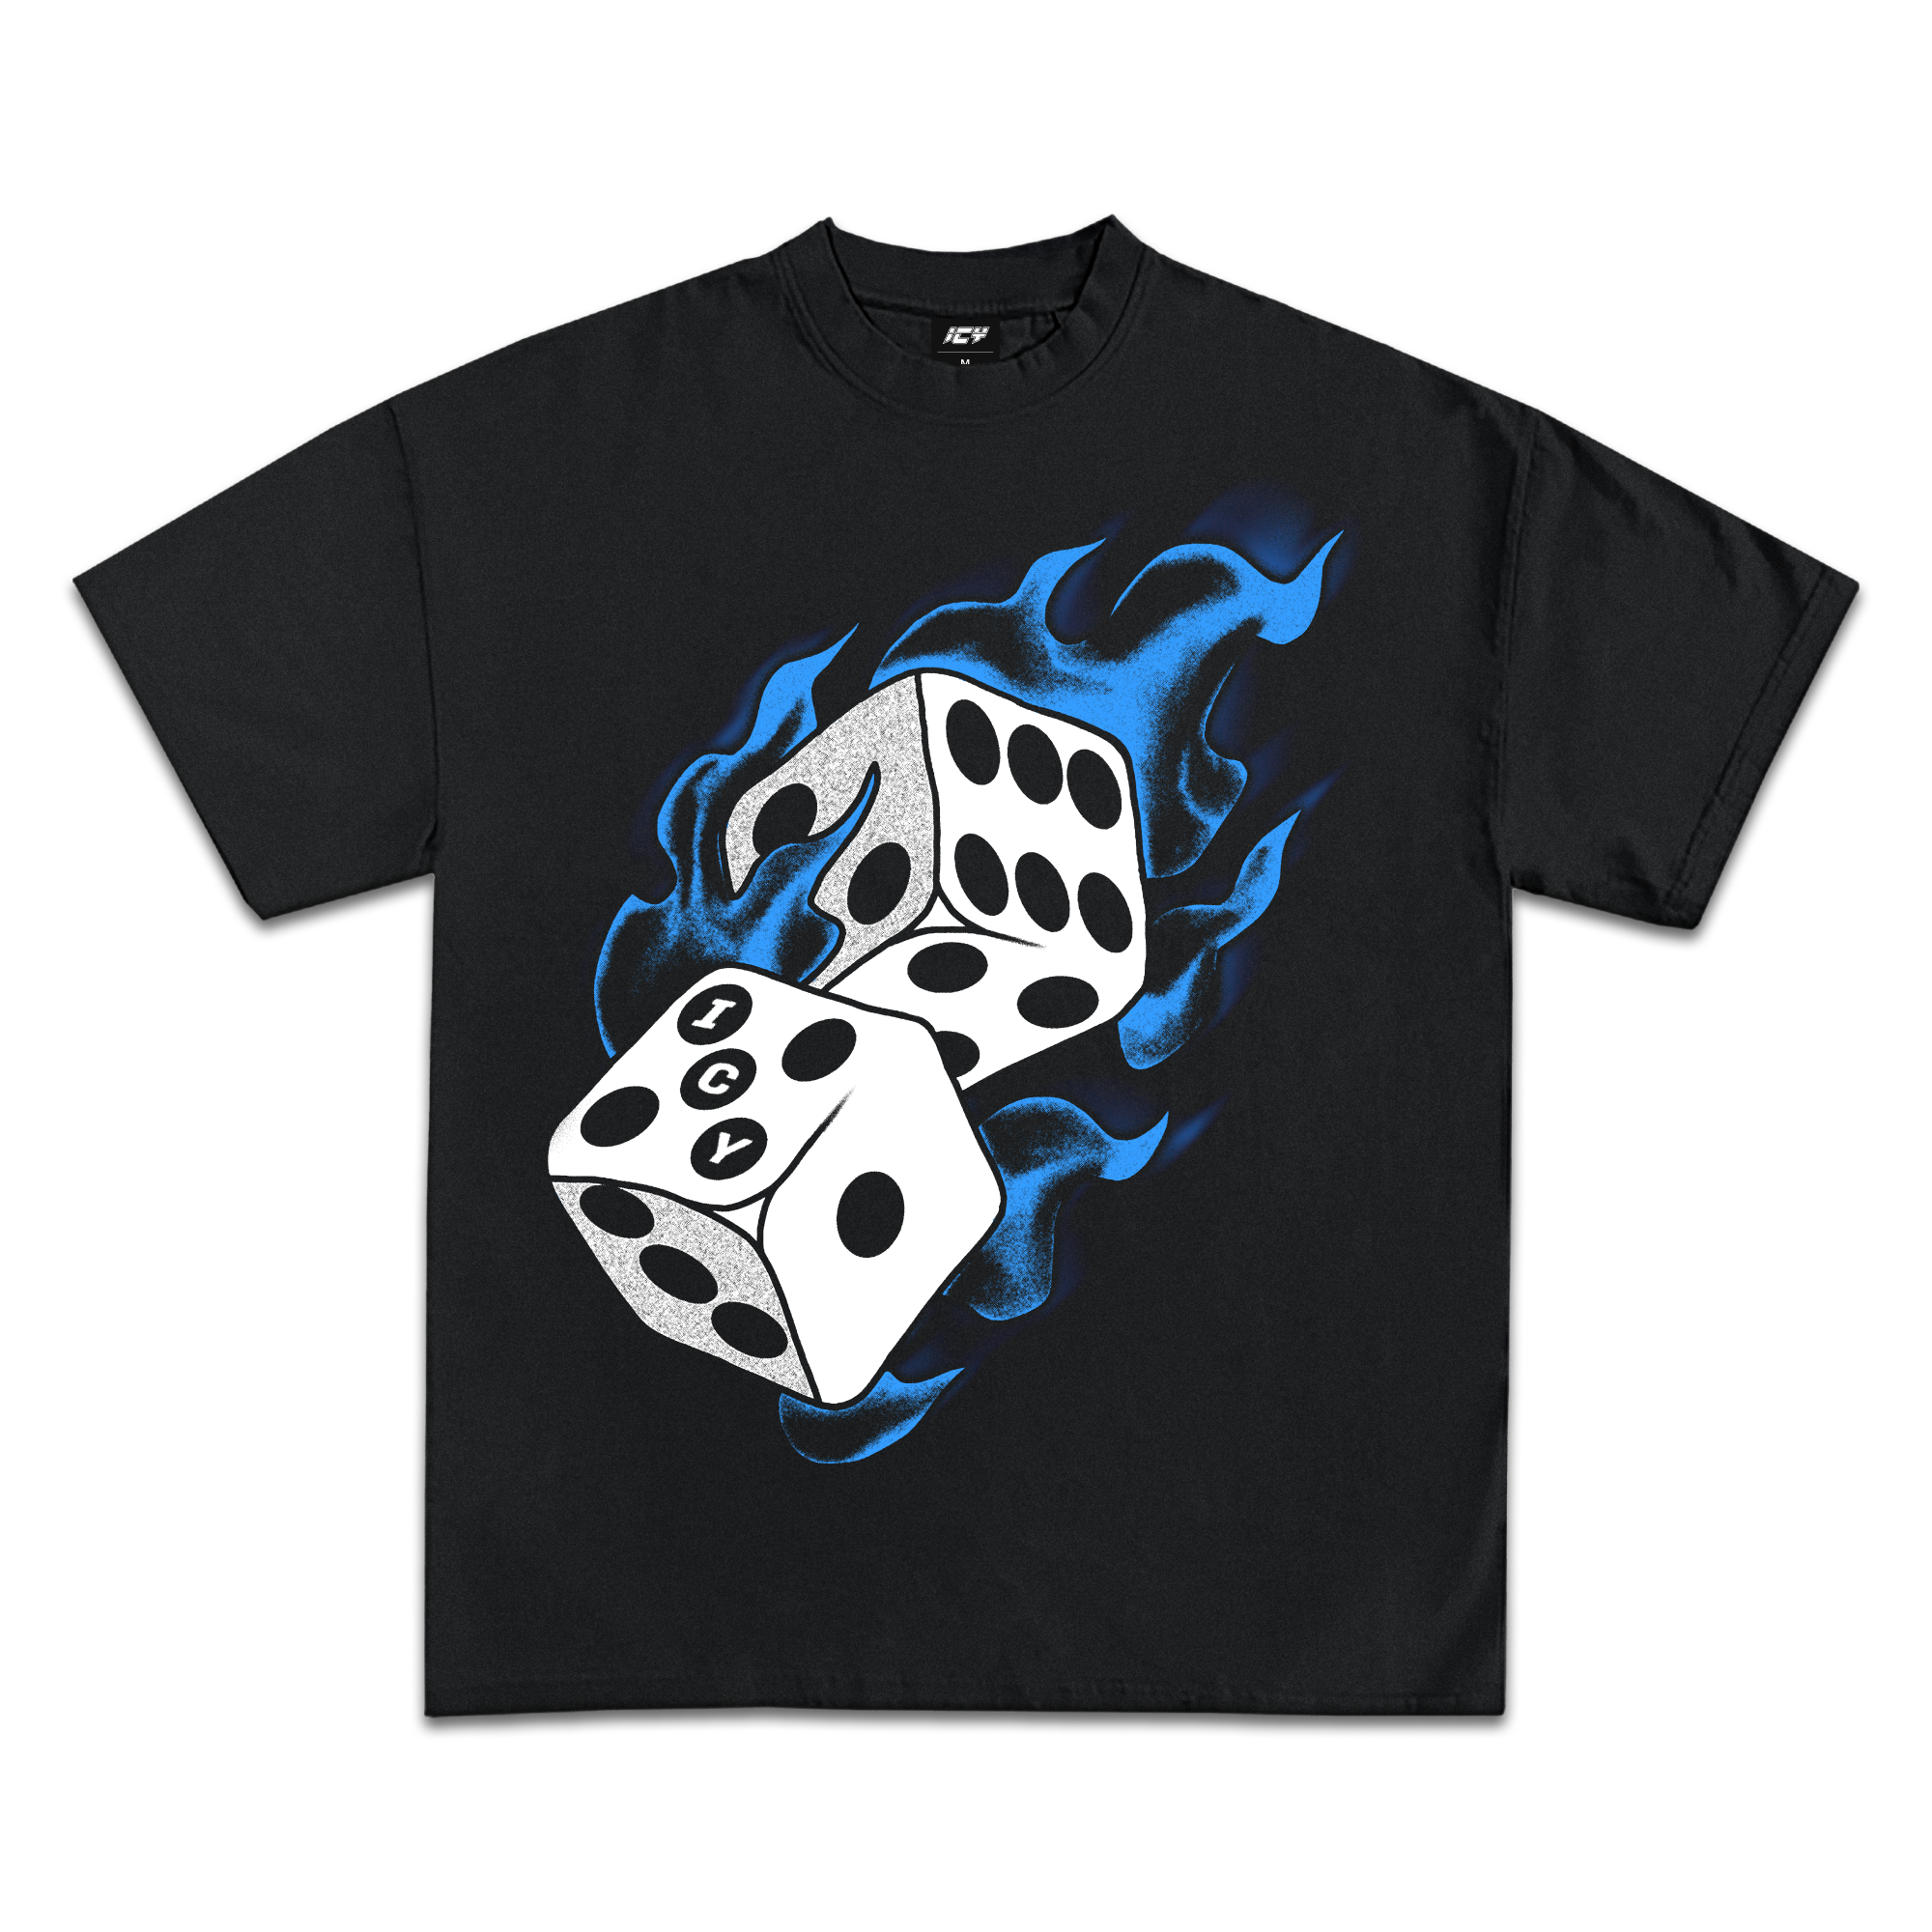 Icy Flaming Dice Graphic T-Shirt